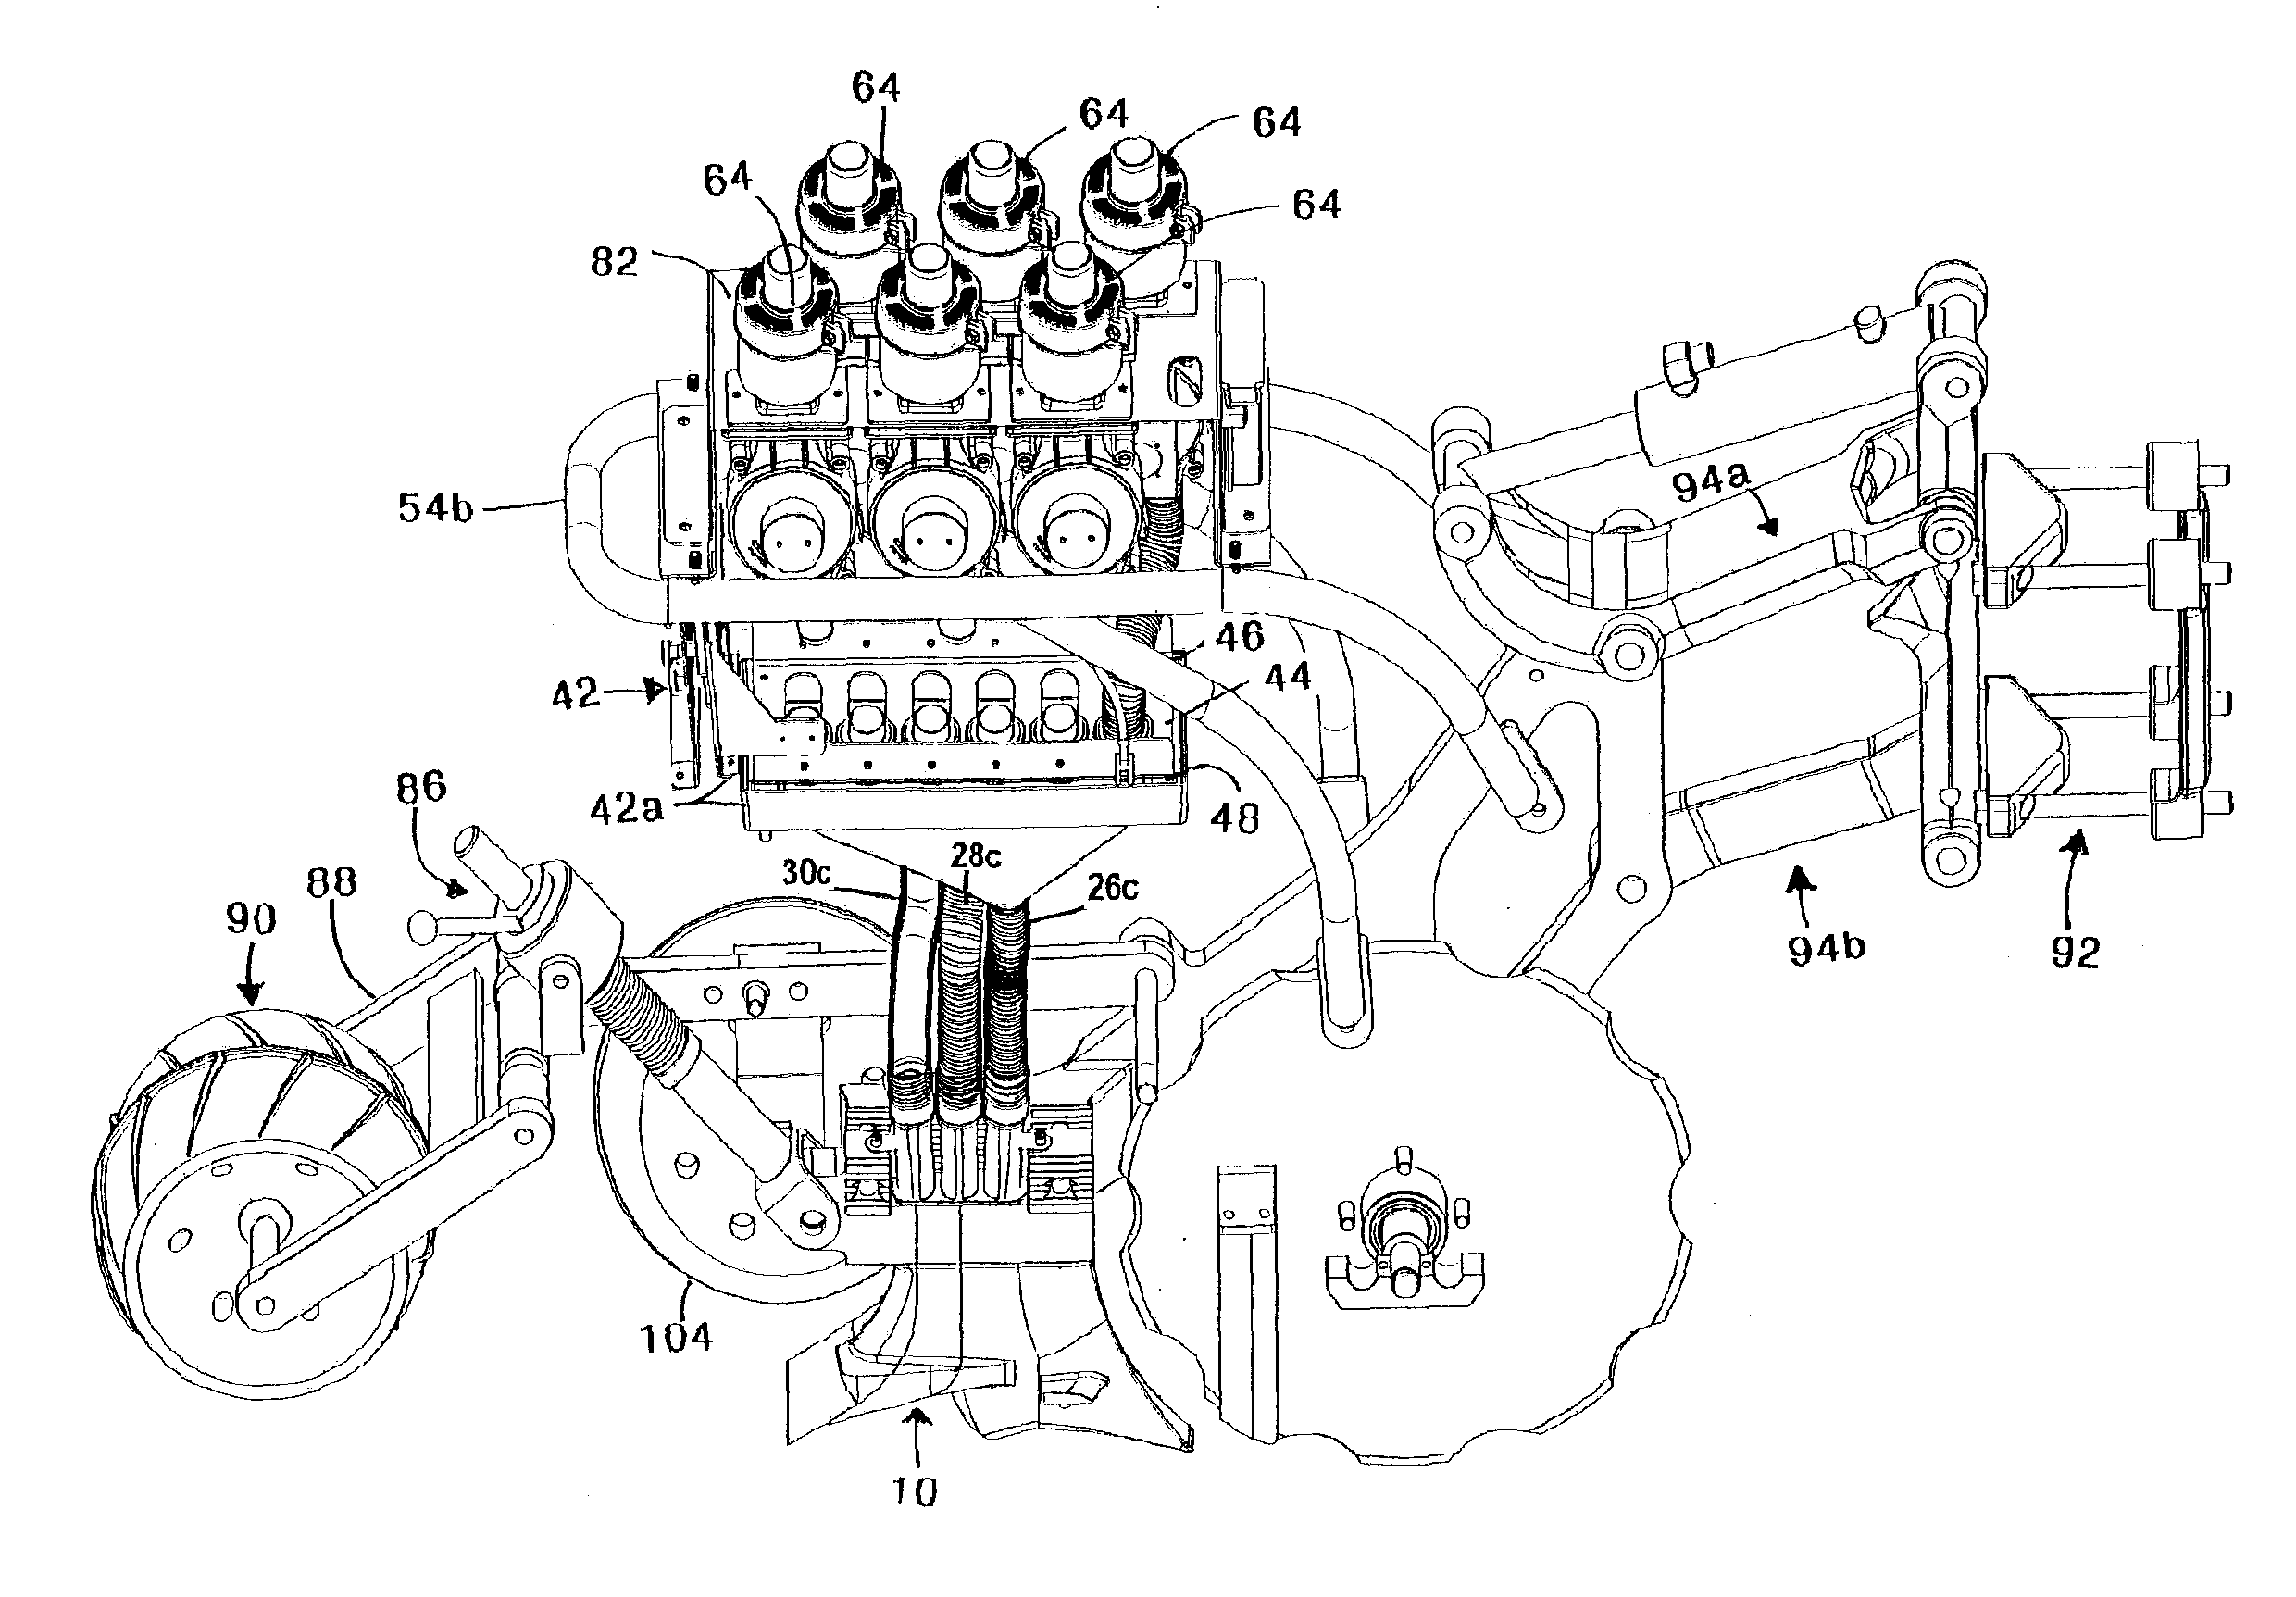 A system for variable-ratio blending of multiple agricultural products for delivery via a ported opener